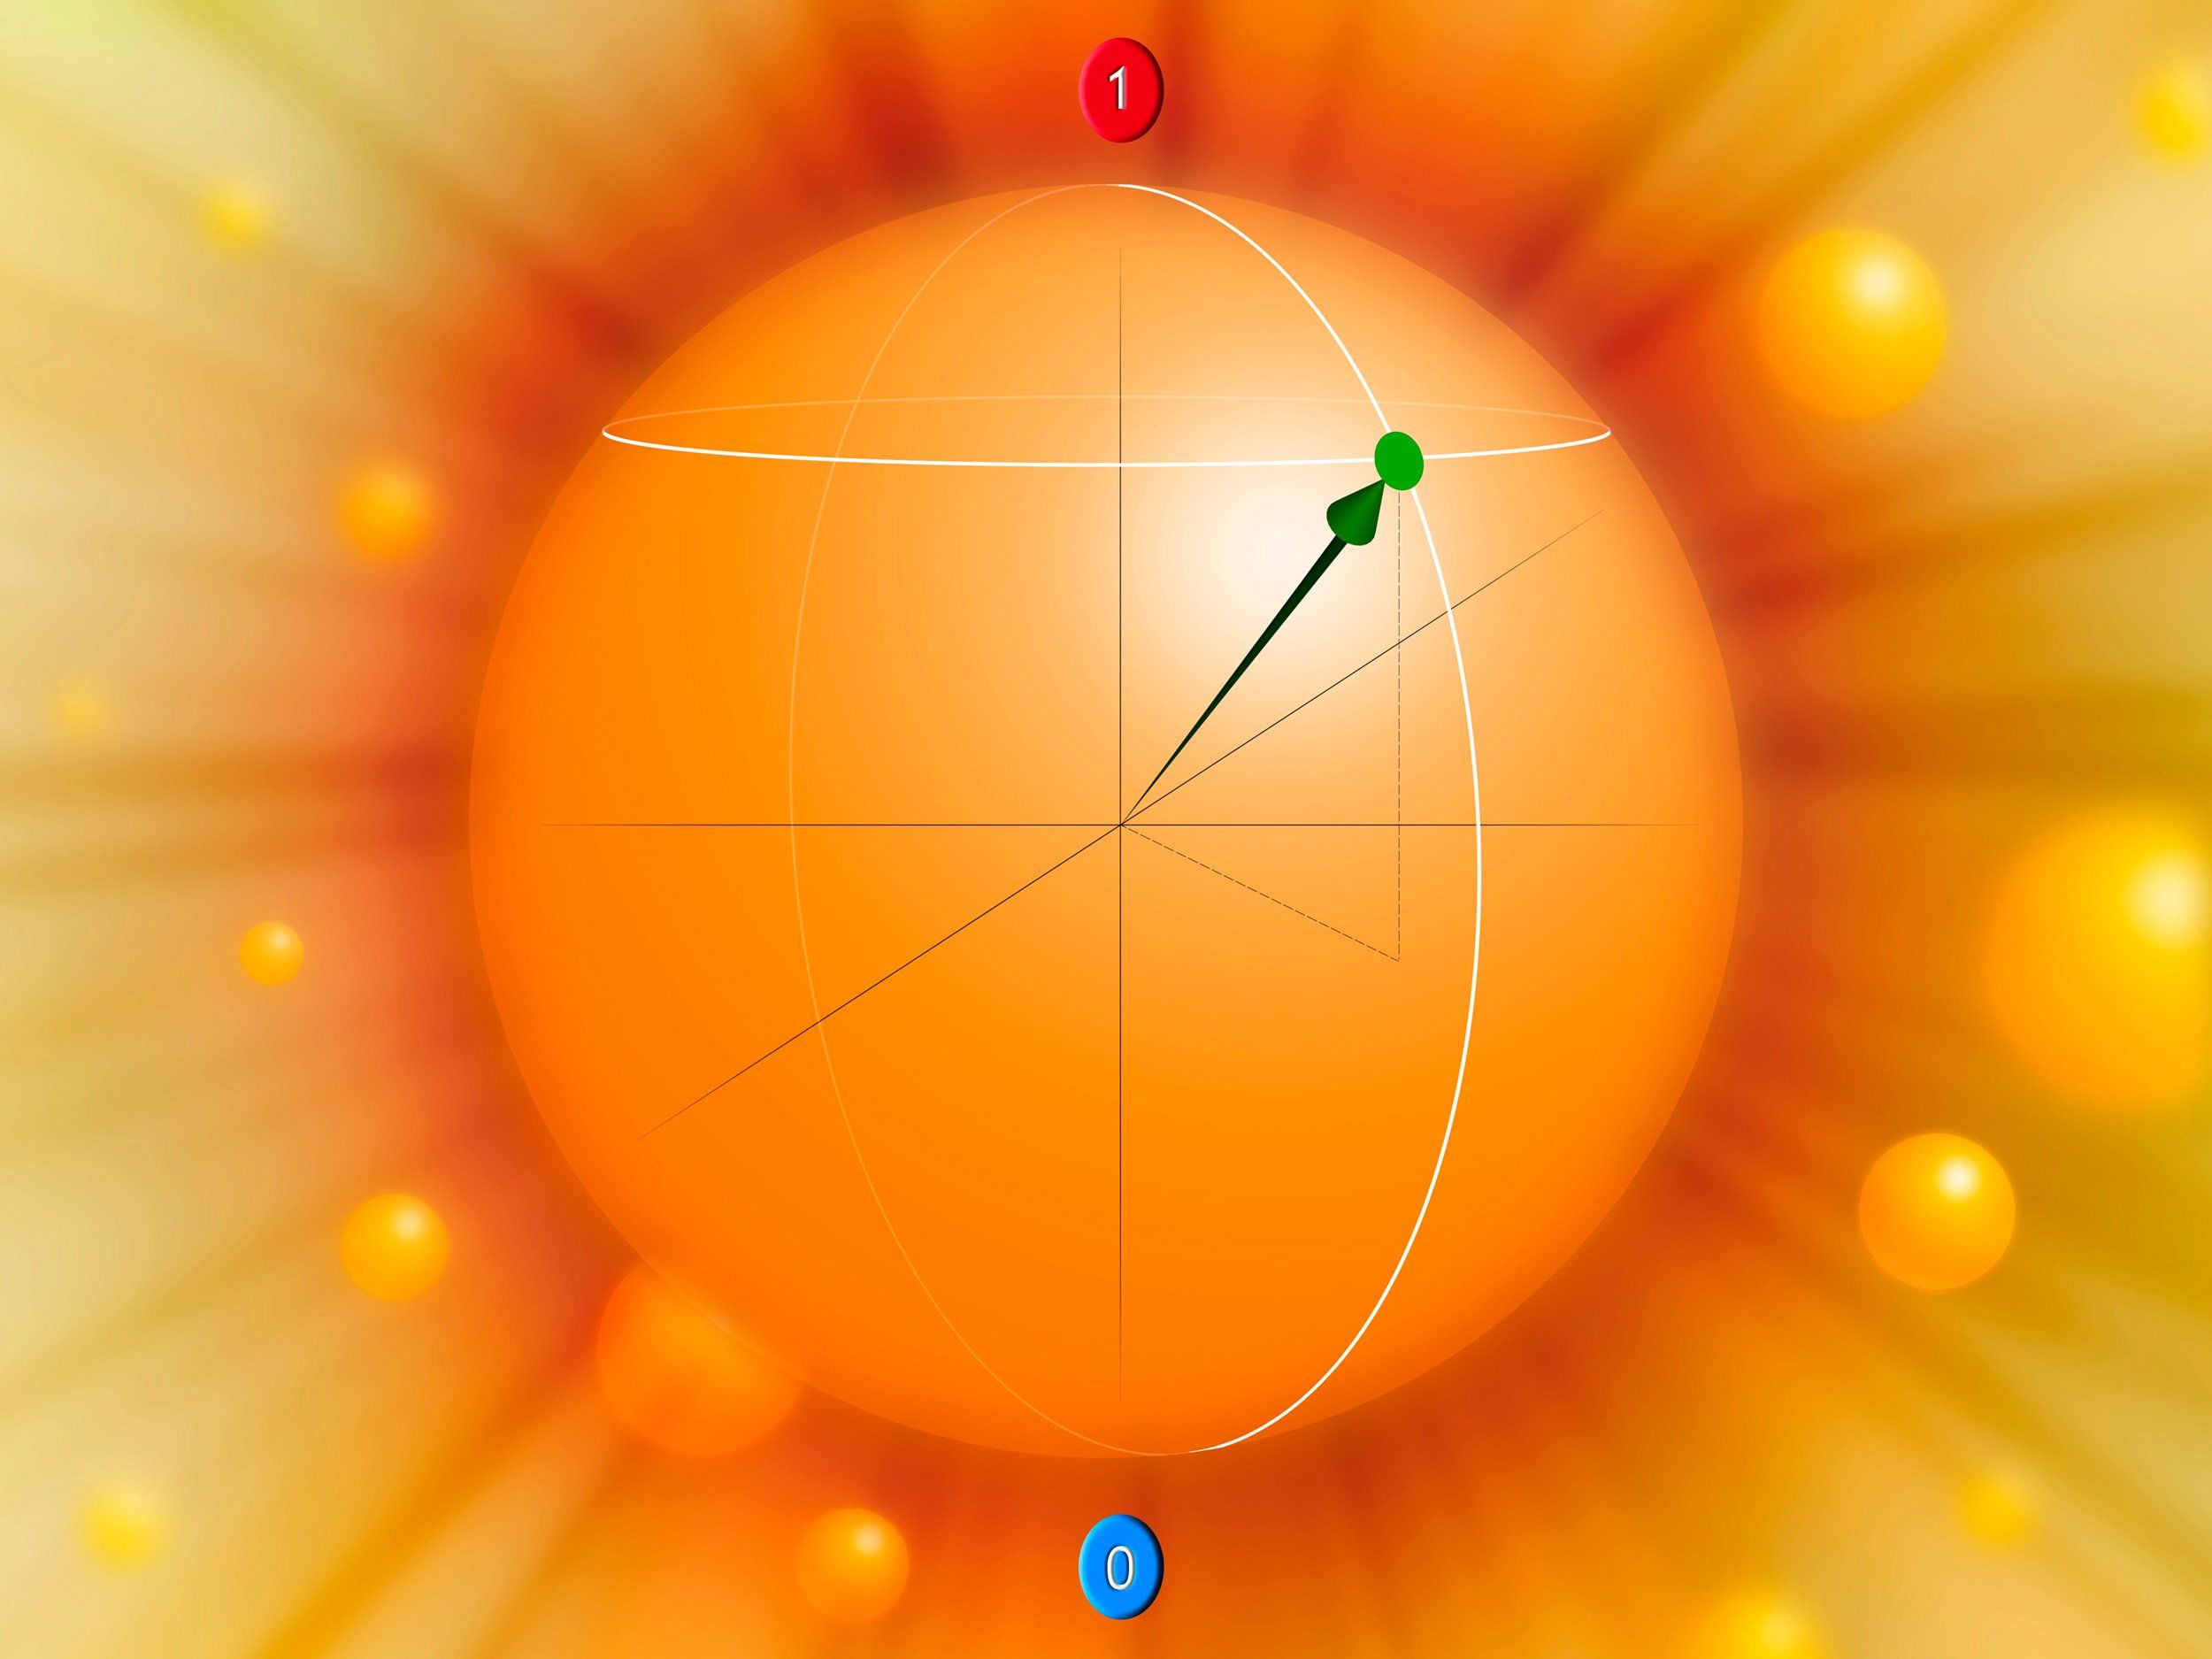 a glowing orange ball with a small green arrow and a red circle 1 on top and a blue circle zero on bottom